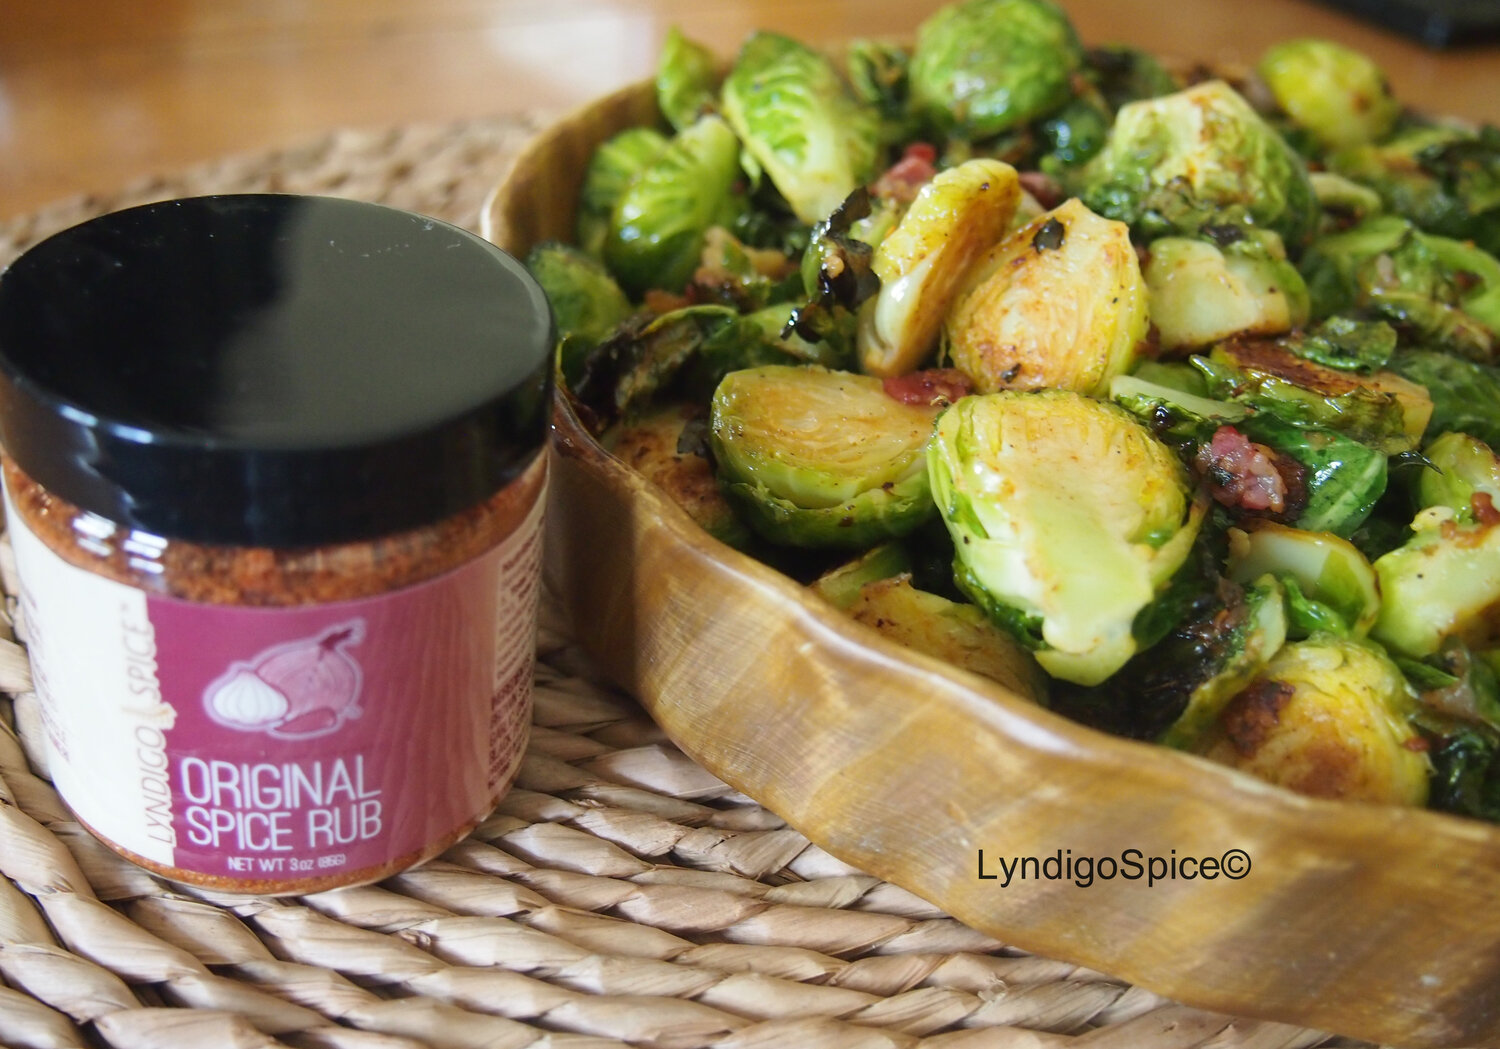 *Roasted Brussel sprouts